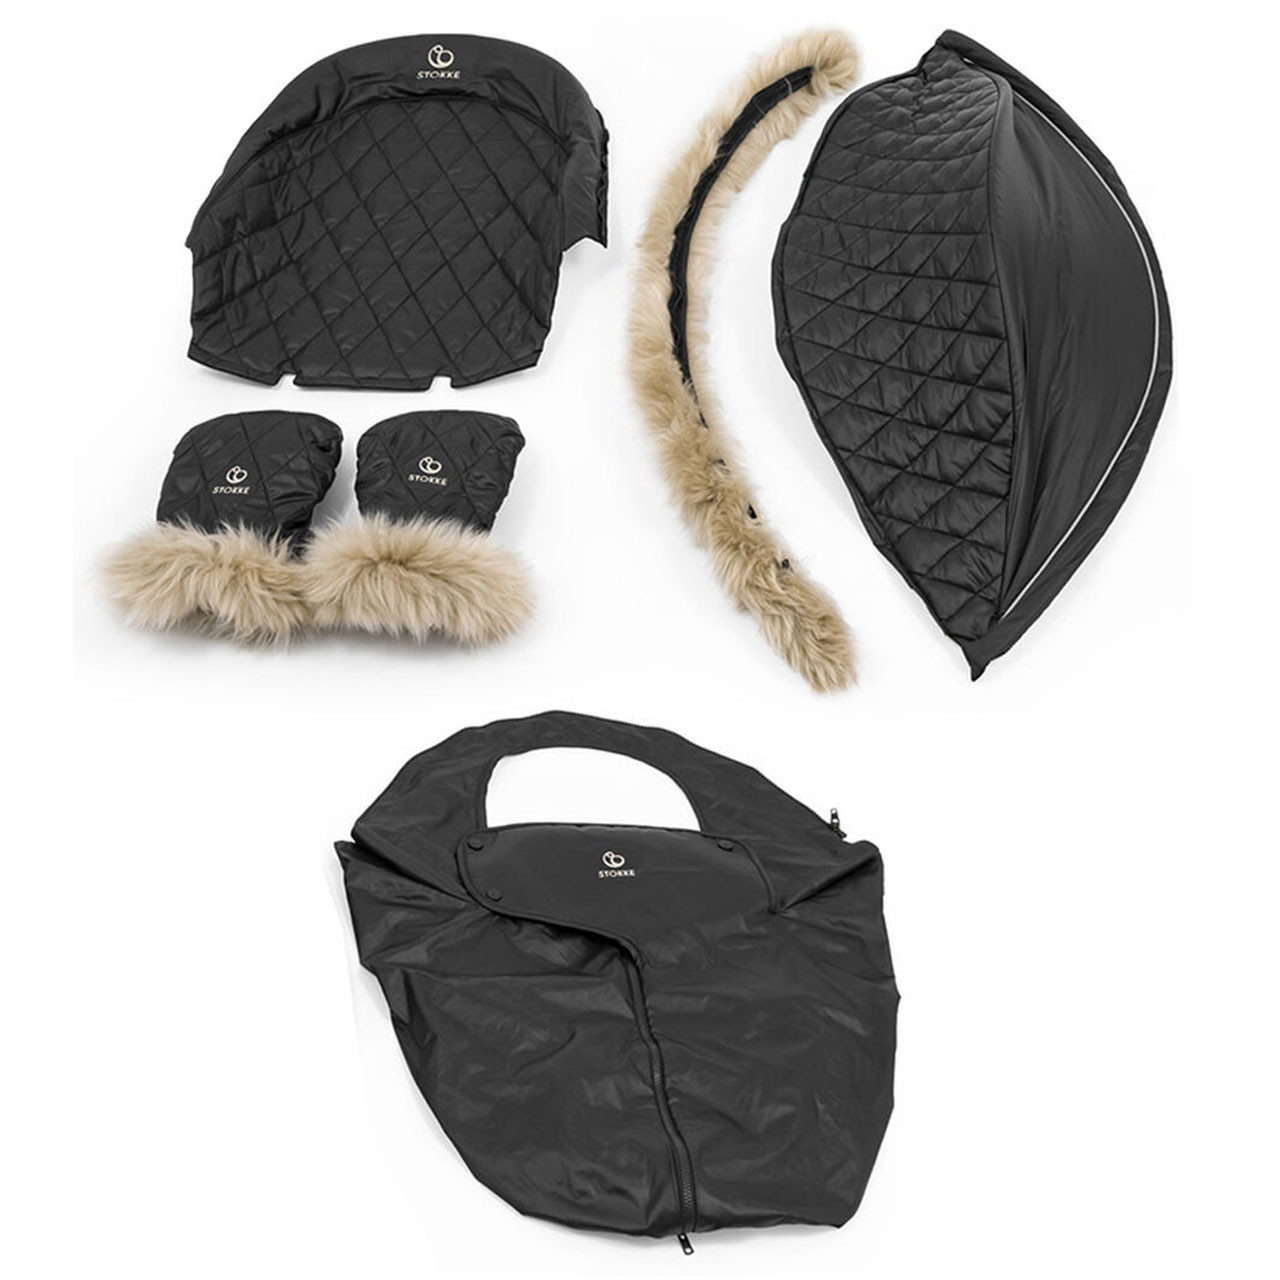  Stokke Xplory X Winter Kit, Onyx Black - Protects Baby from  Cold Weather & Wind - Includes Fleece Mittens for Parents - PFC-Free  Fabrics, Reflective Zipper, Genuine Sheepskin Rims : Clothing